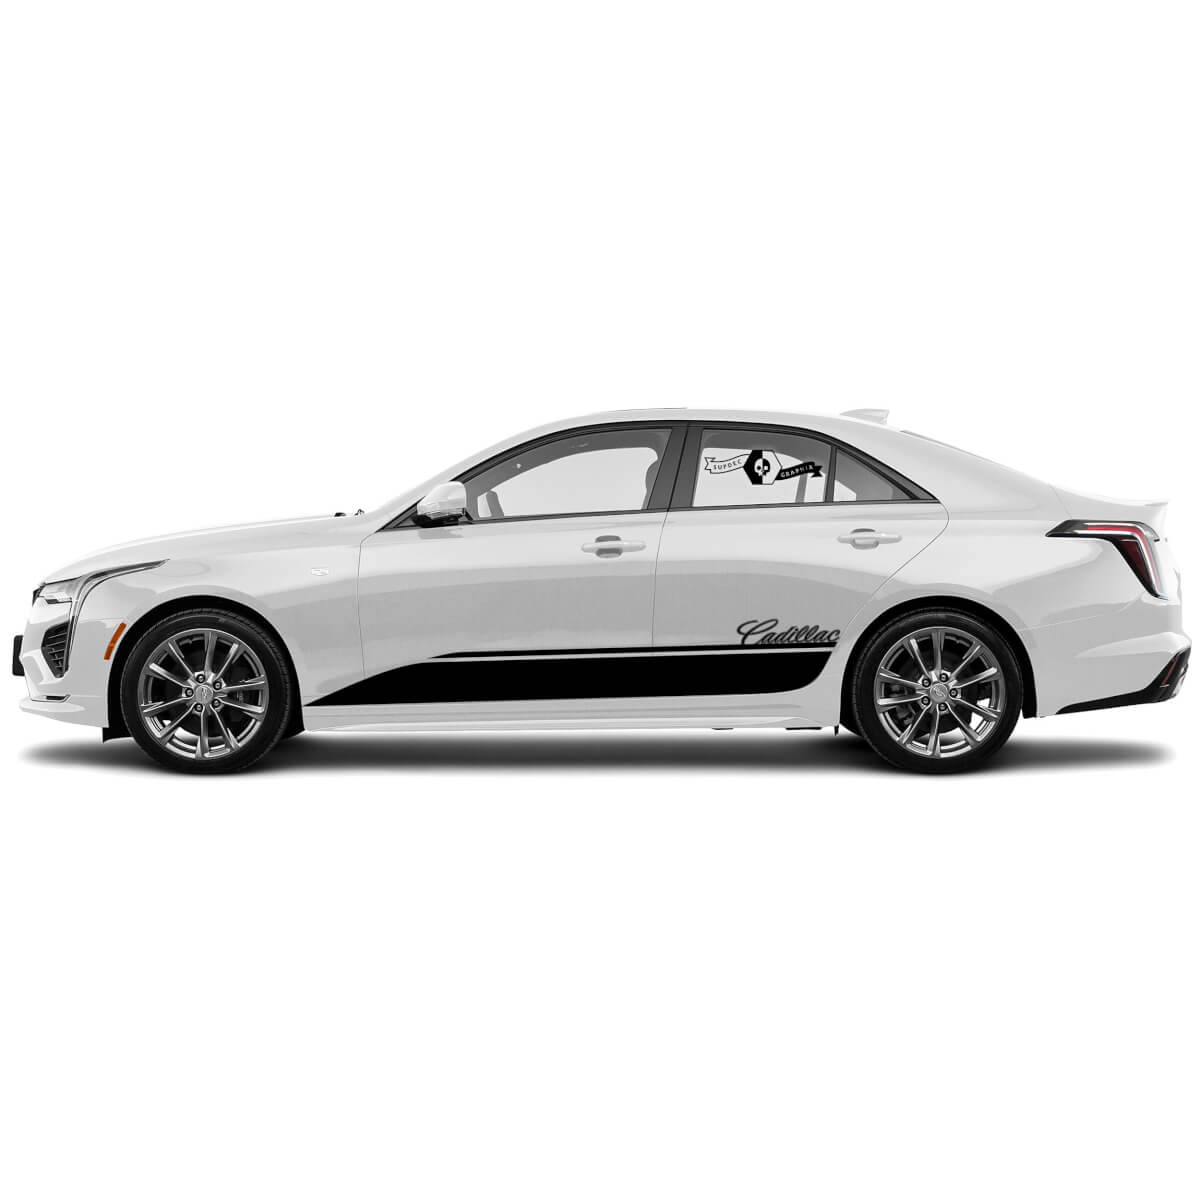 2 New Decal Sticker Stylish Doors Accent Rocker Panel Trim Lines Side Wrap vinyl Decal for Cadillac CT4